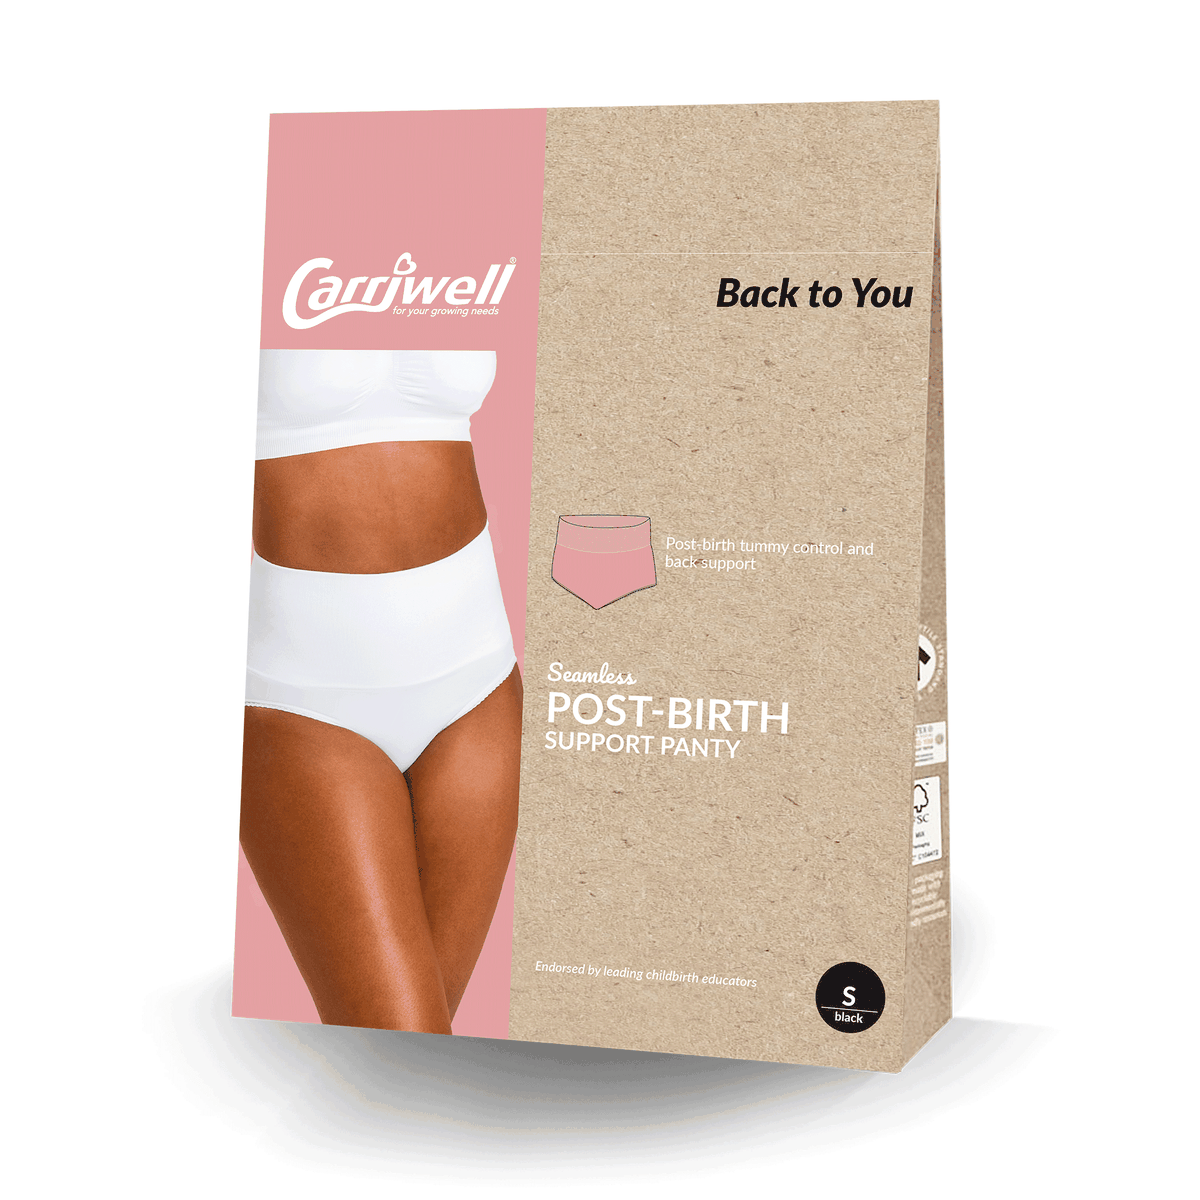 Carriwell - Post Birth Support Panty - Black, Shop Today. Get it Tomorrow!